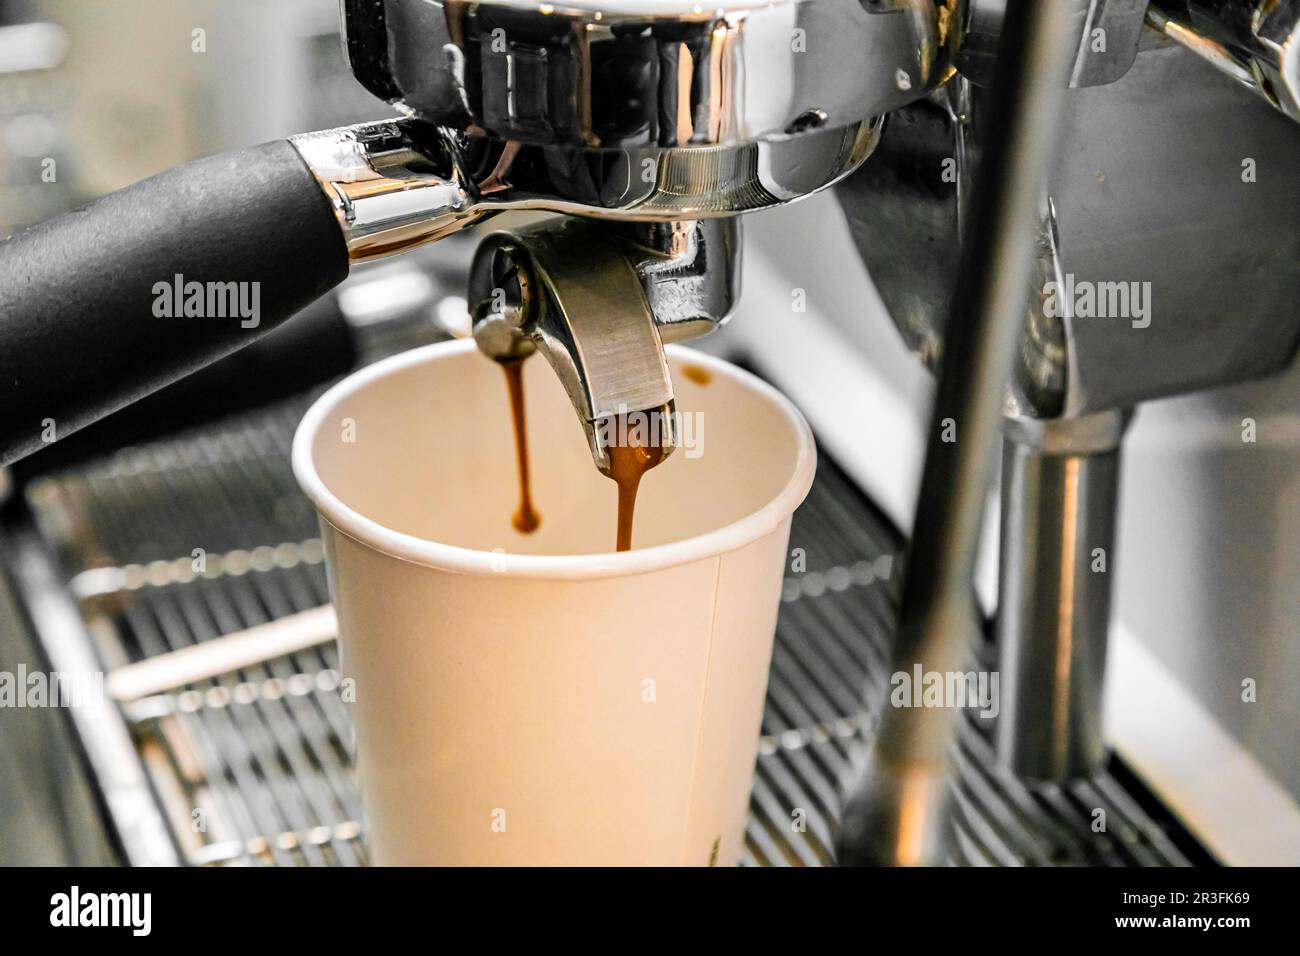 Professional coffee making machine pouring a take out drink Stock Photo